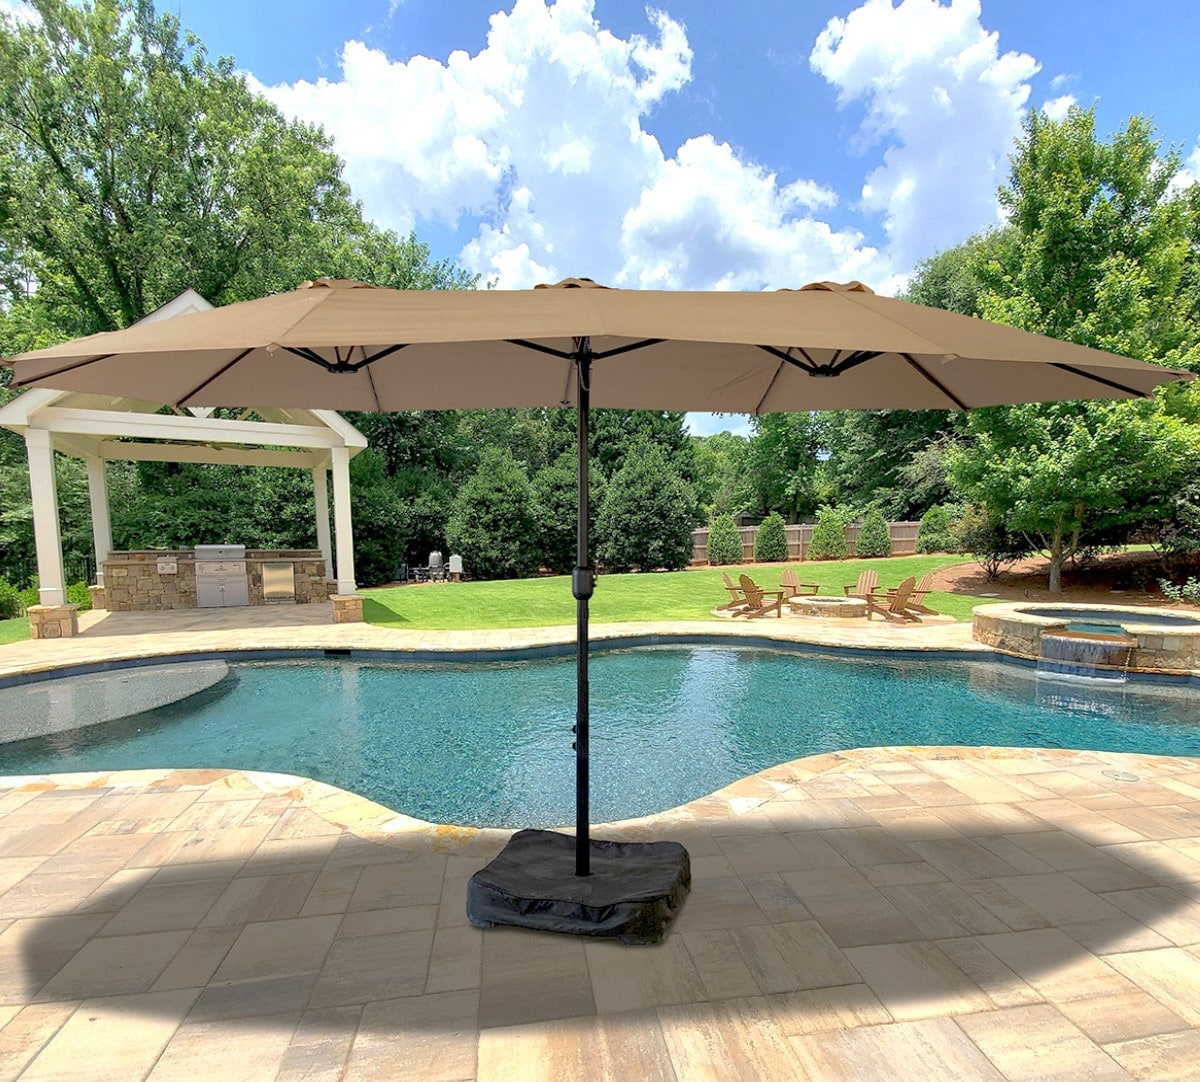 Outdoor Patio Umbrella Home Deck Yard Pool 11 Ft Green Wood Table Shade Cover 